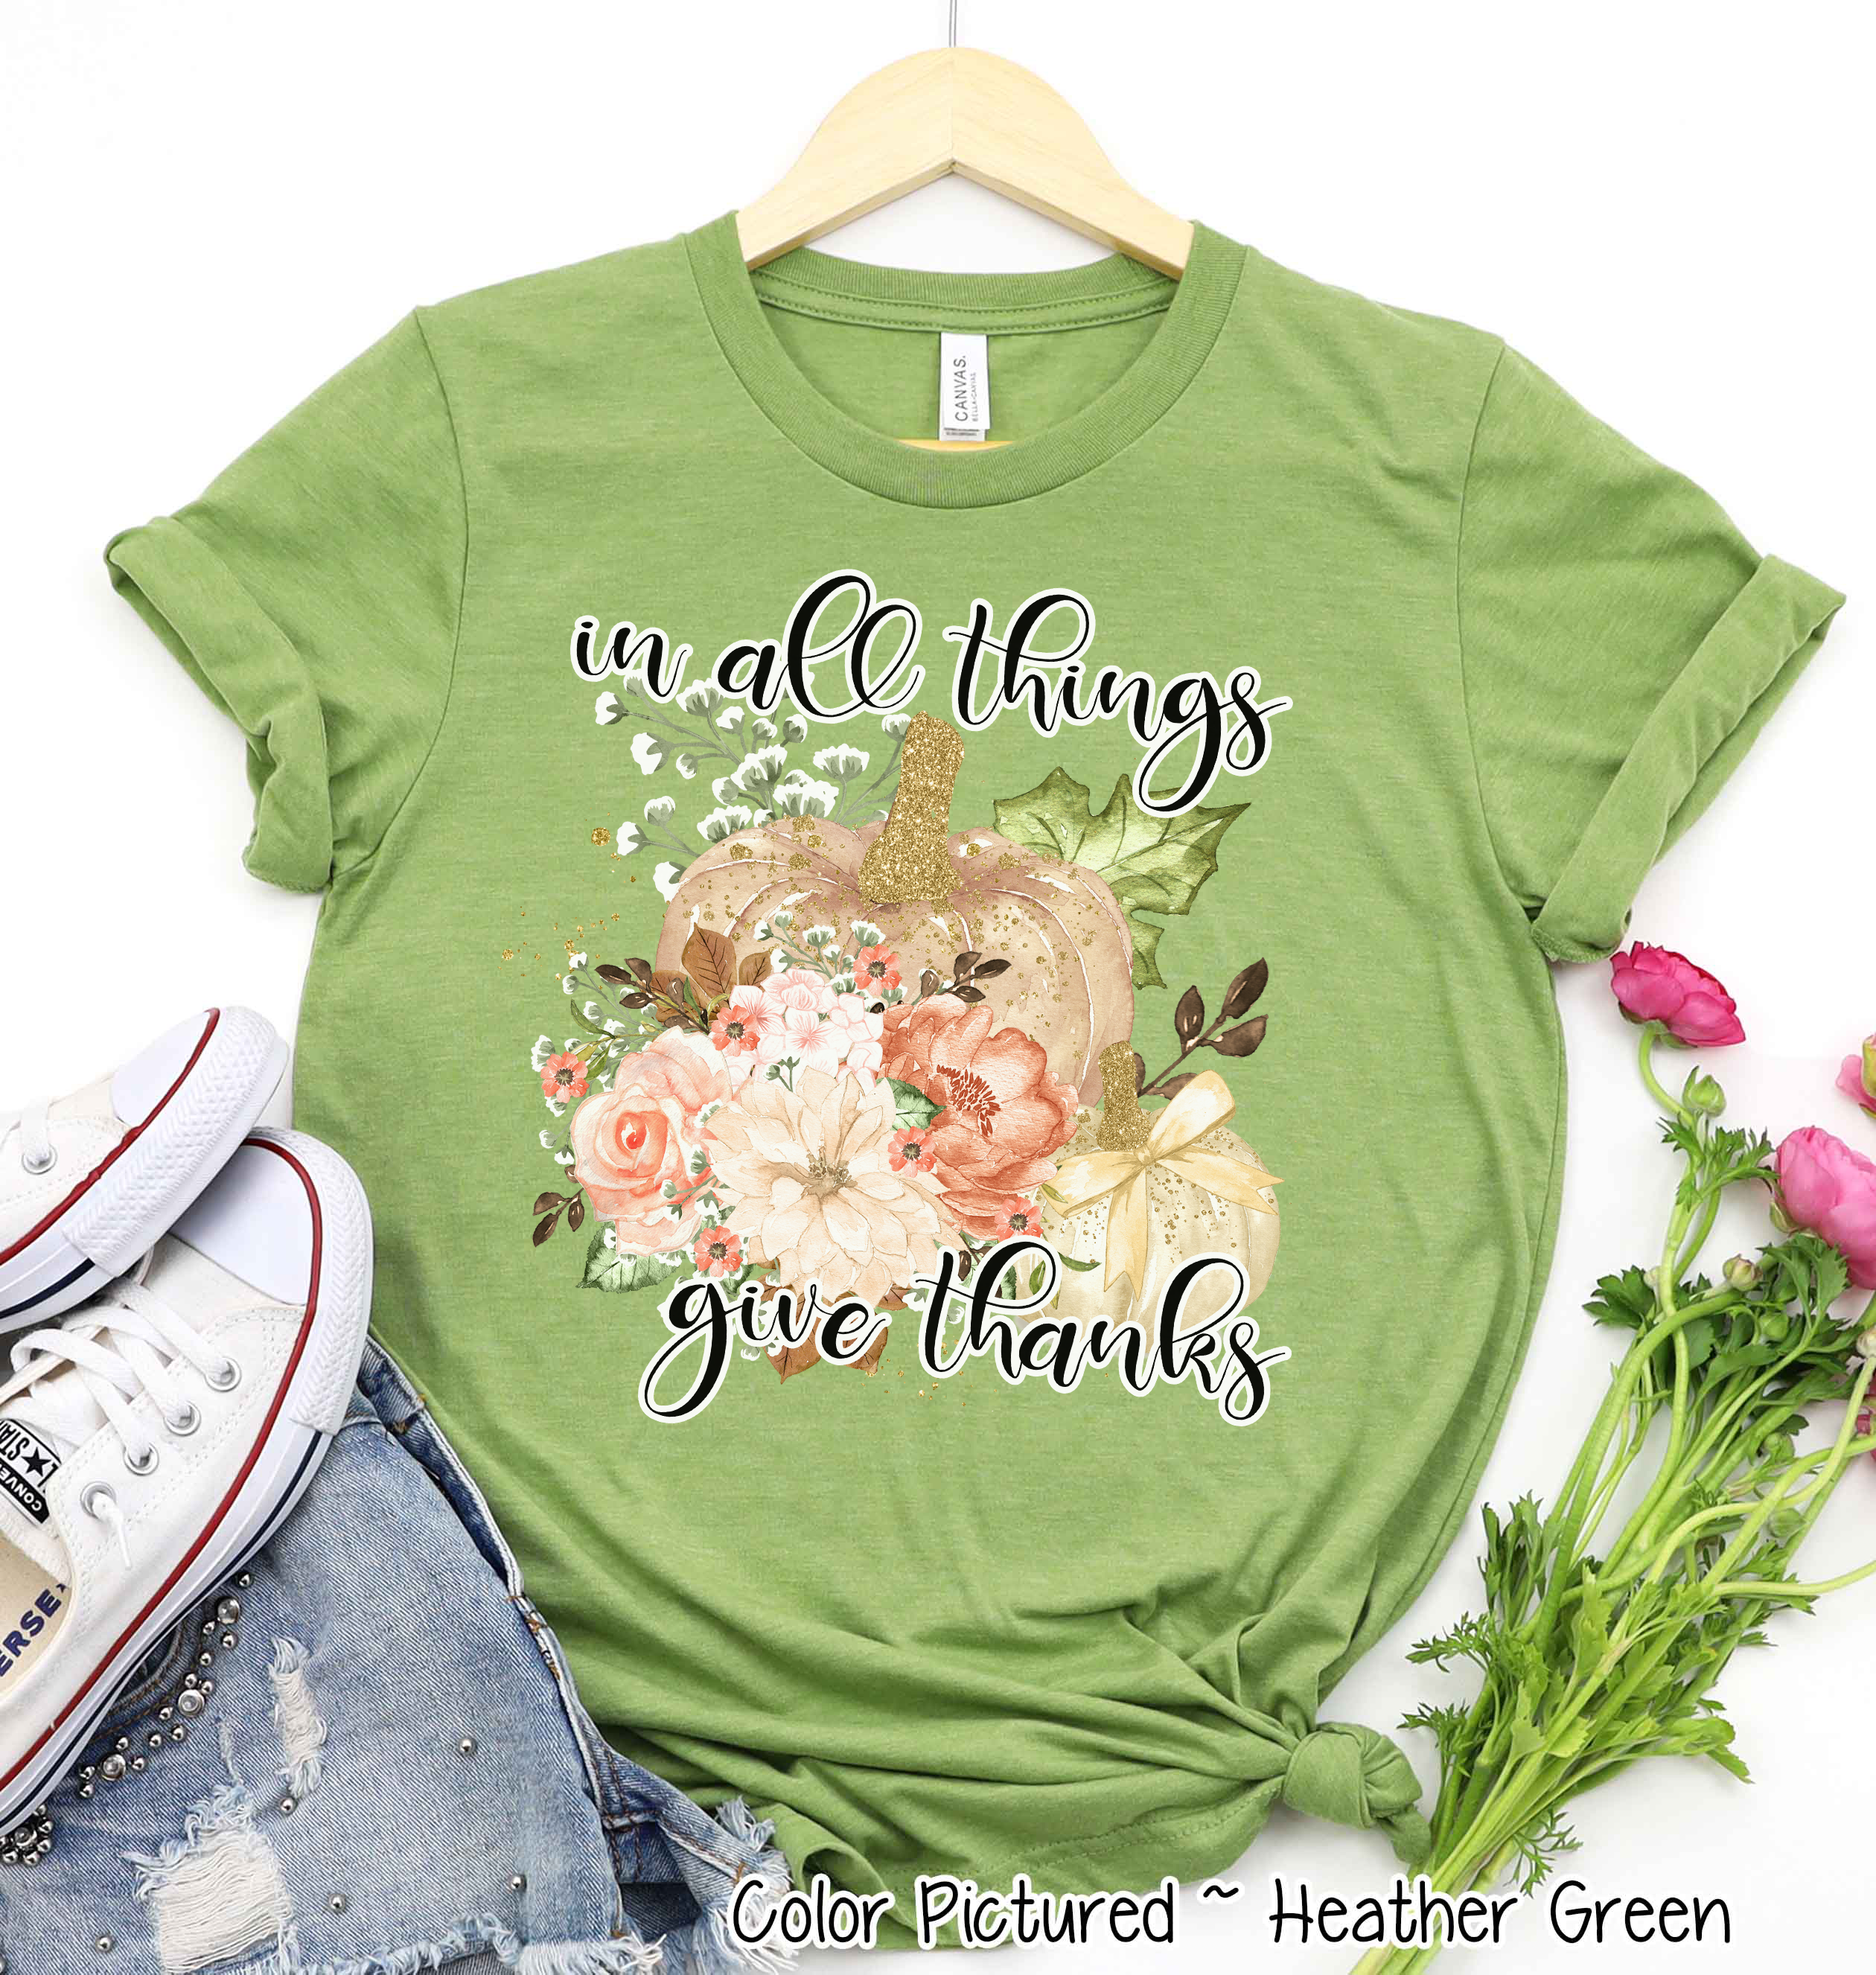 In All Things Give Thanks Pink Floral Pumpkin Tee